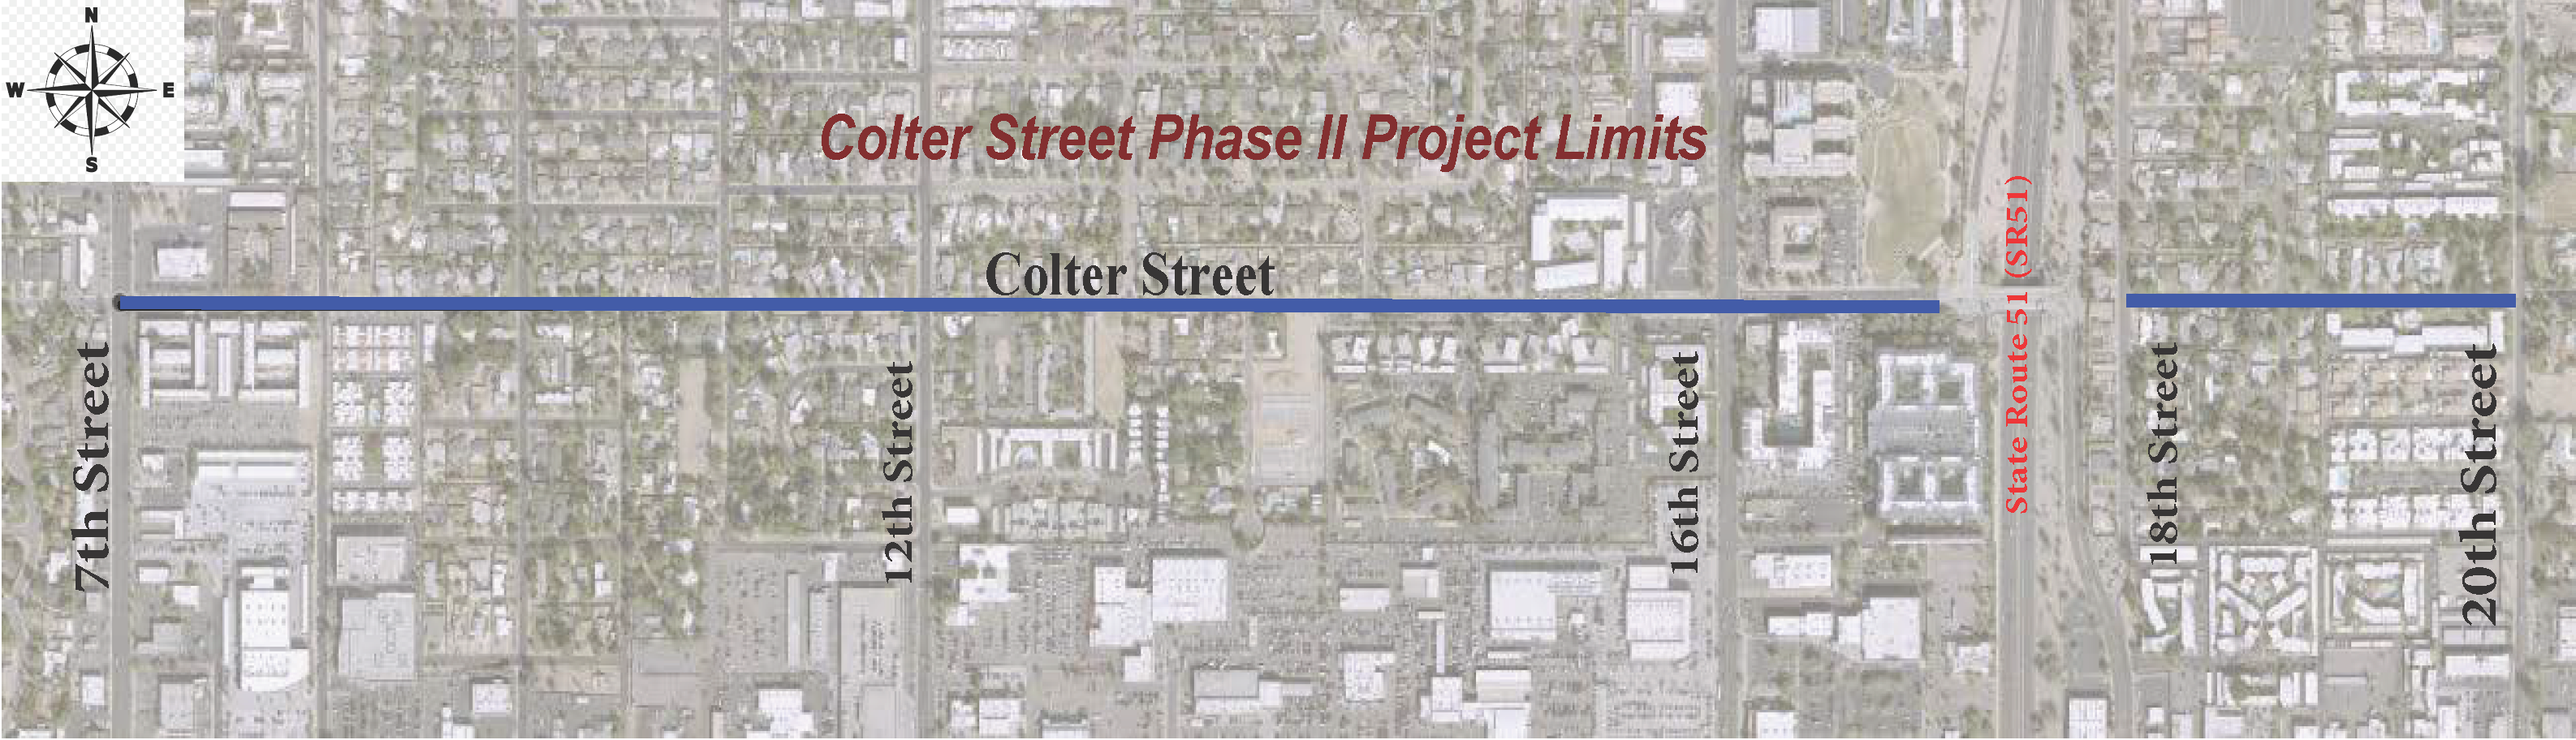 Colter Street Phase II from 7th Street to 20th Street